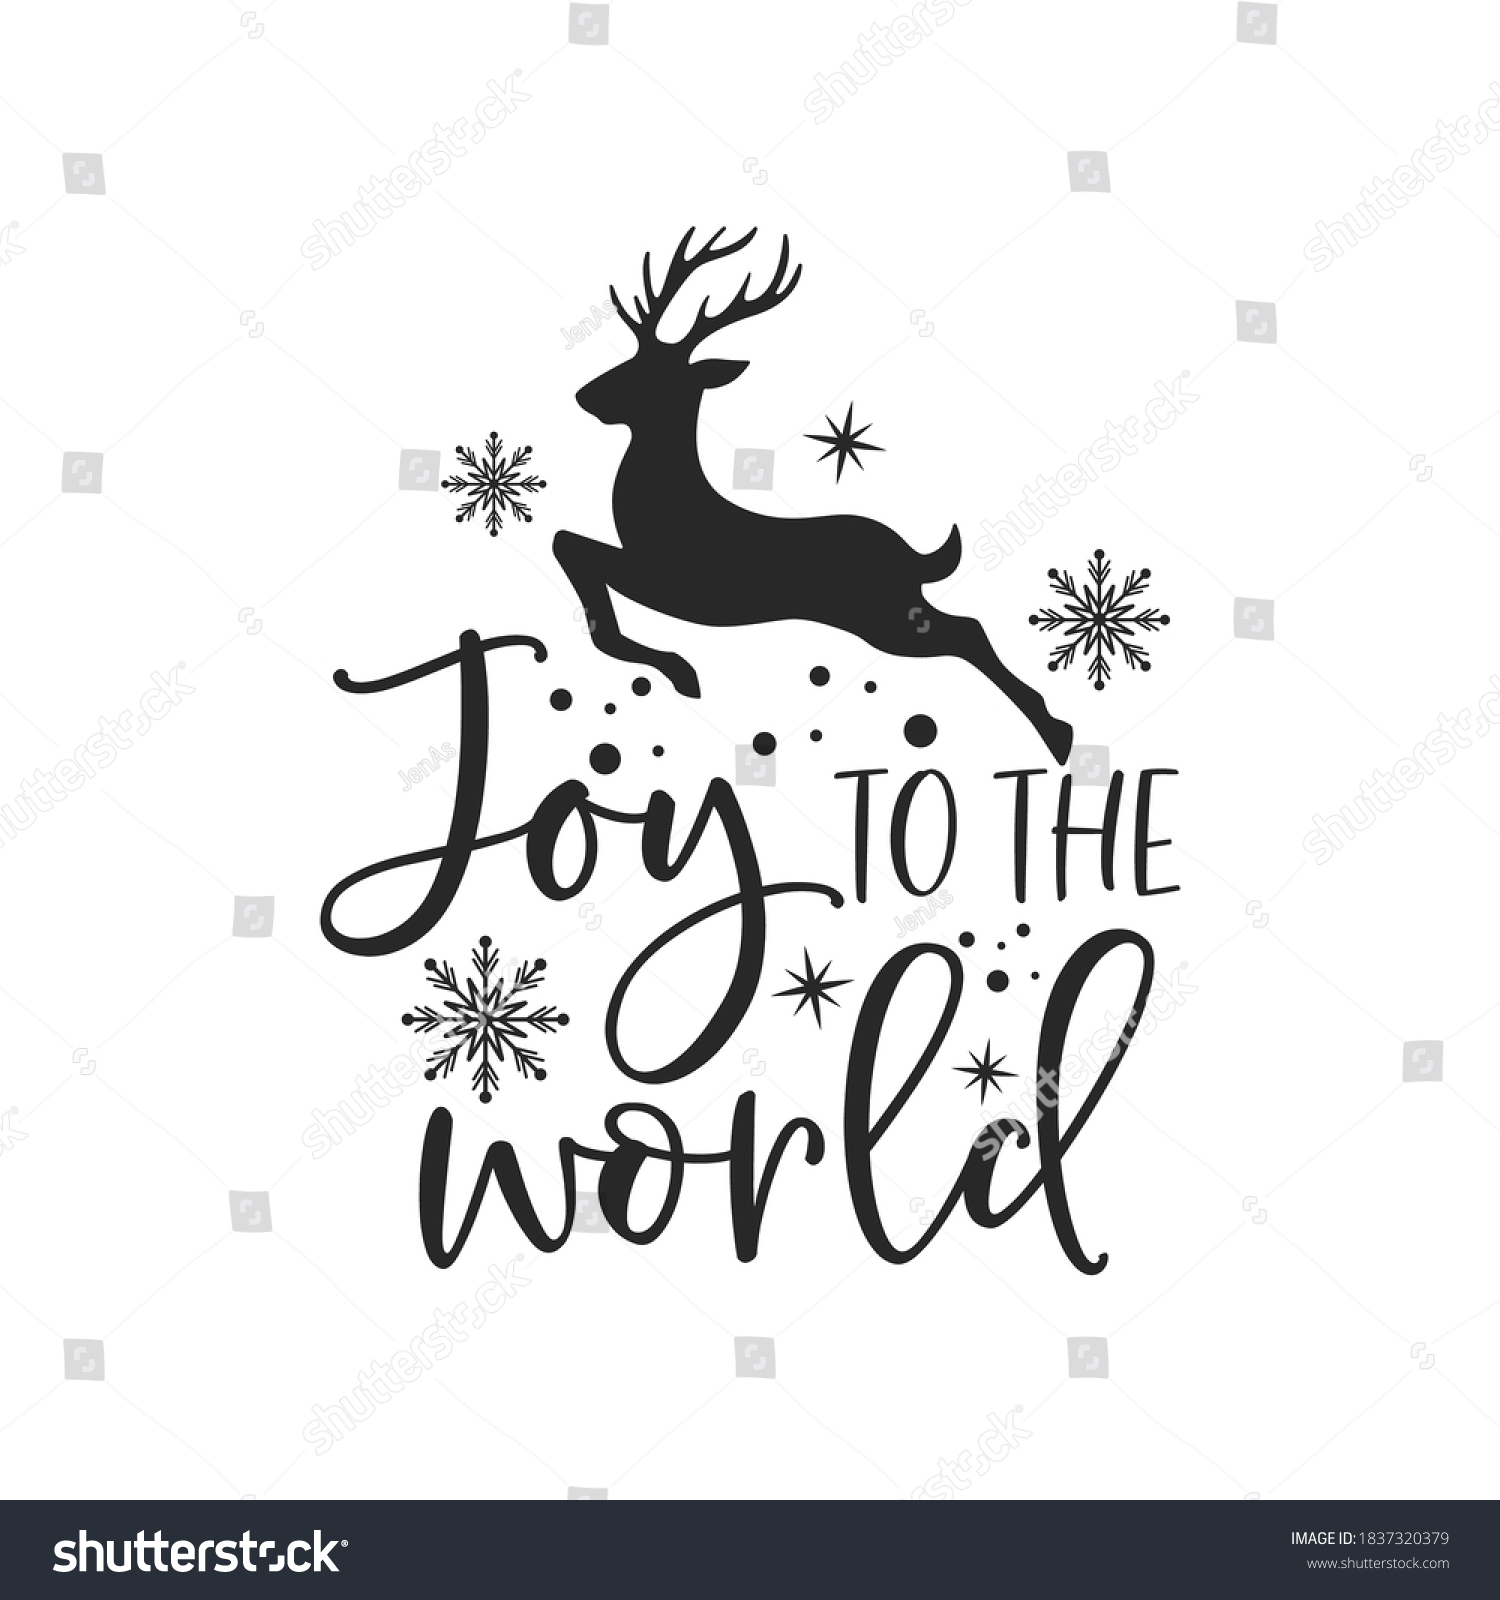 Joy to the world positive slogan inscription. Christmas postcard, New Year, banner lettering. Illustration for prints on t-shirts and bags, posters, cards. Christmas phrase. Vector quotes. #1837320379